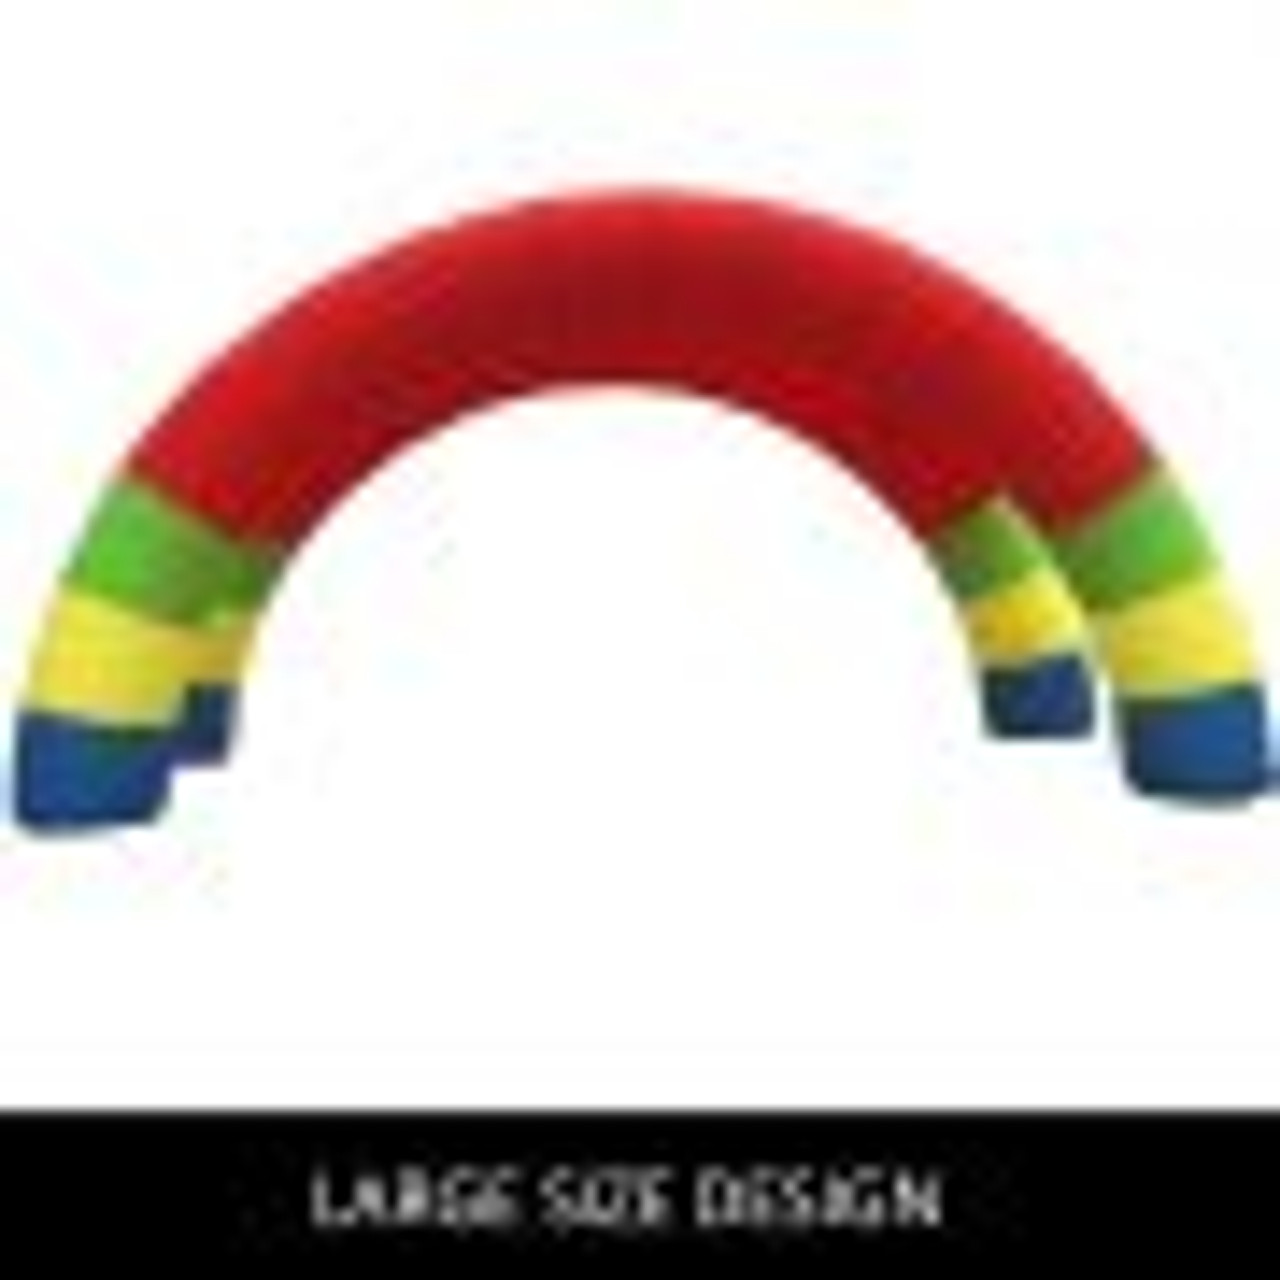 Twin Arches, 26ft X 13ft Inflatable Rainbow Arch, with 370W Blower, for Advertising Birthday Party Decoration Arch